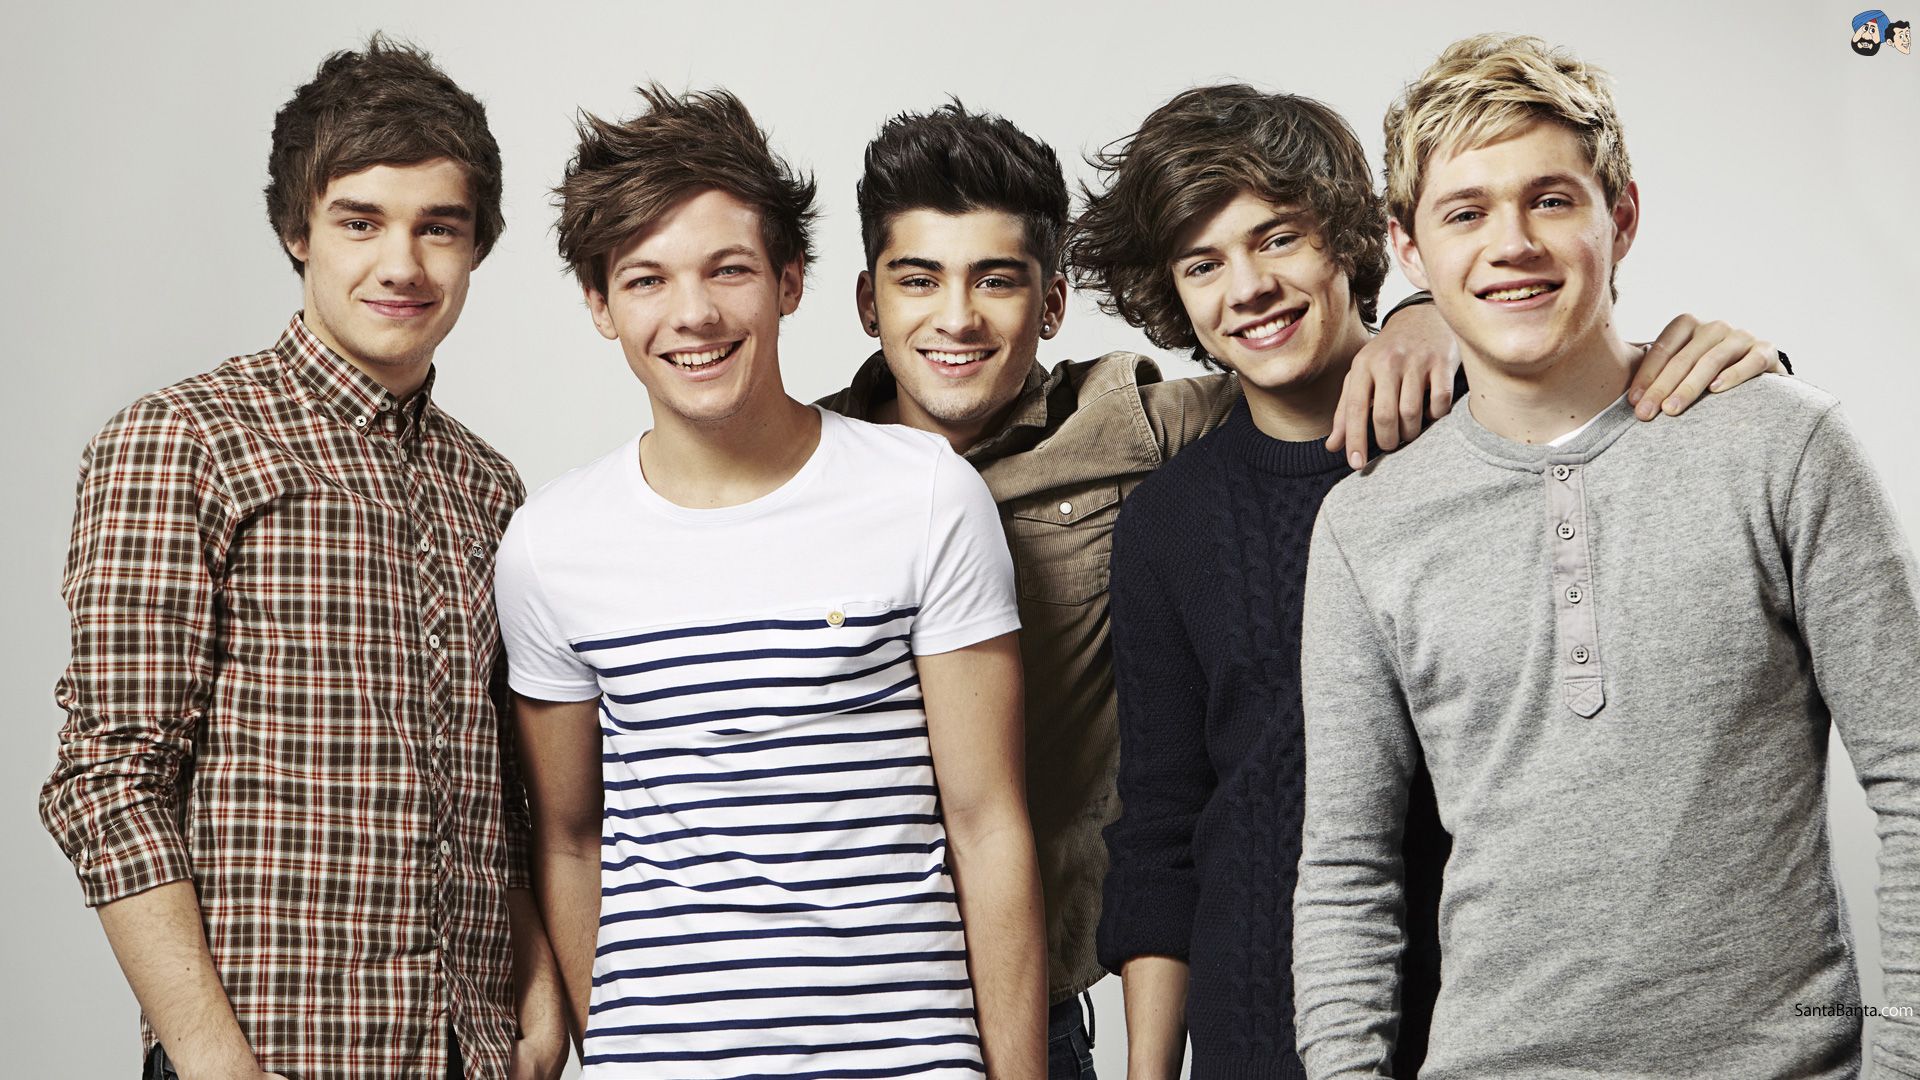 One direction wallpaper 1086x792 - One Direction